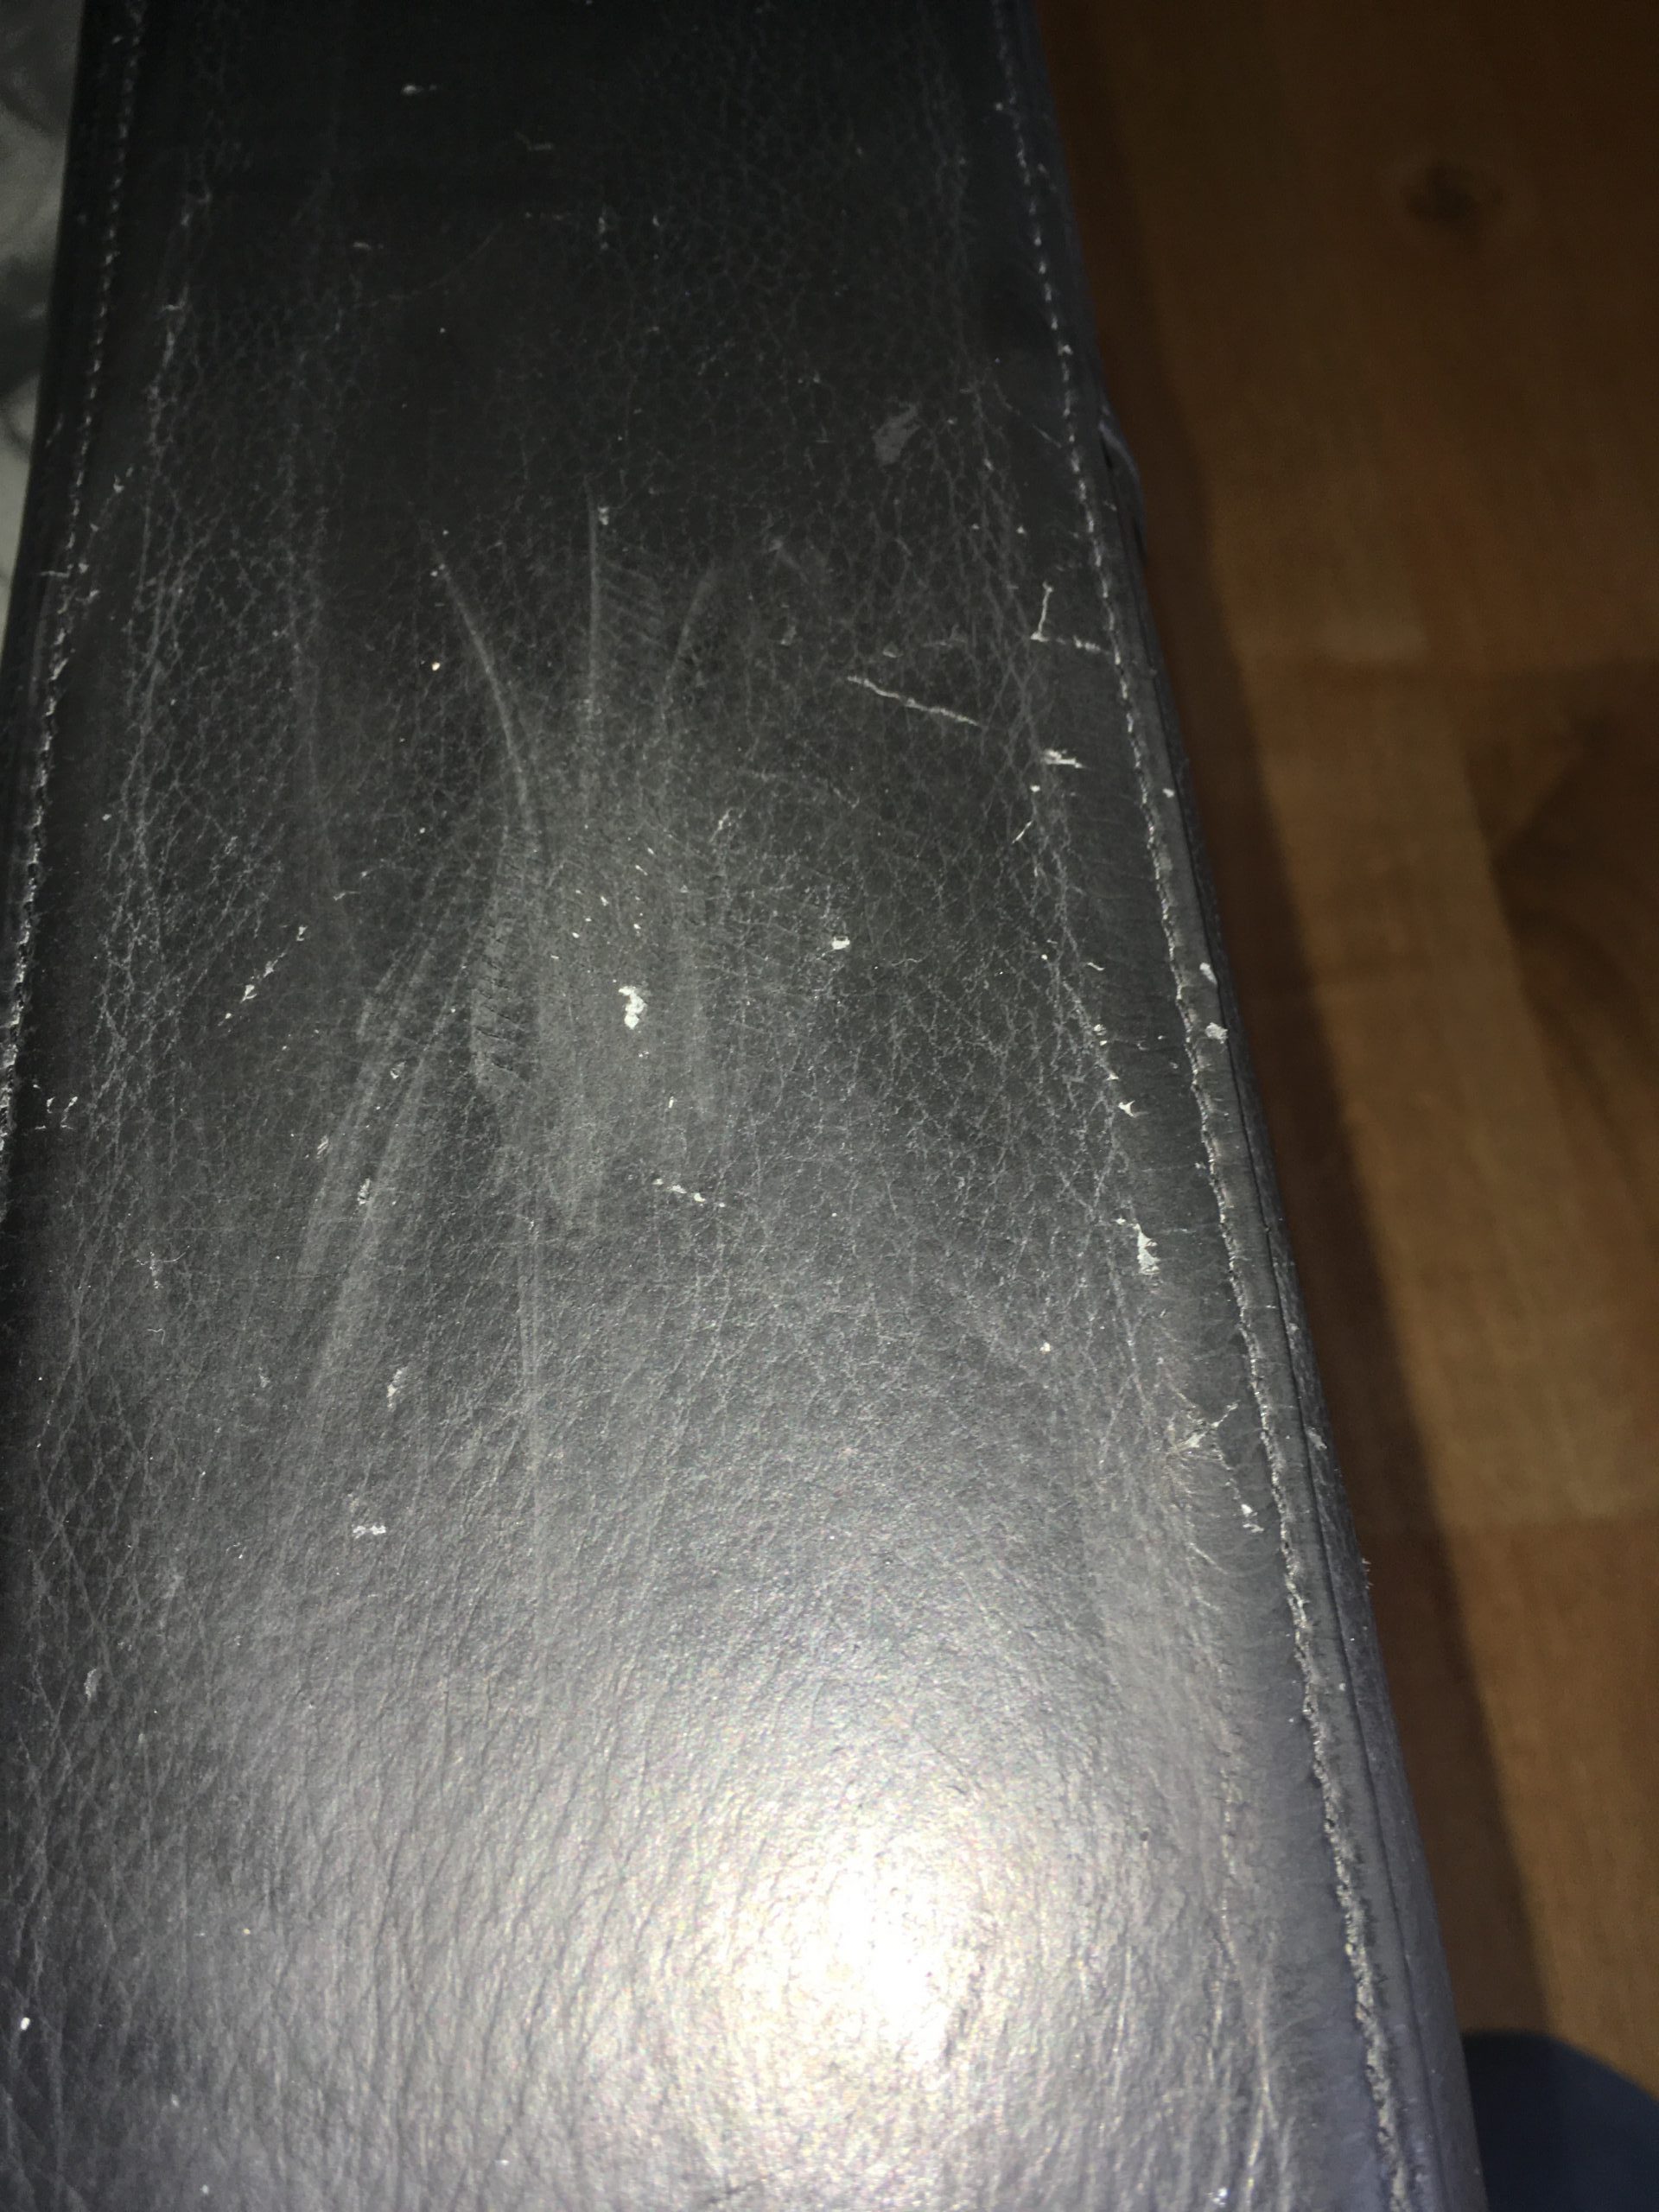 Scratches In Leather Pro Rers, Scratch On Leather